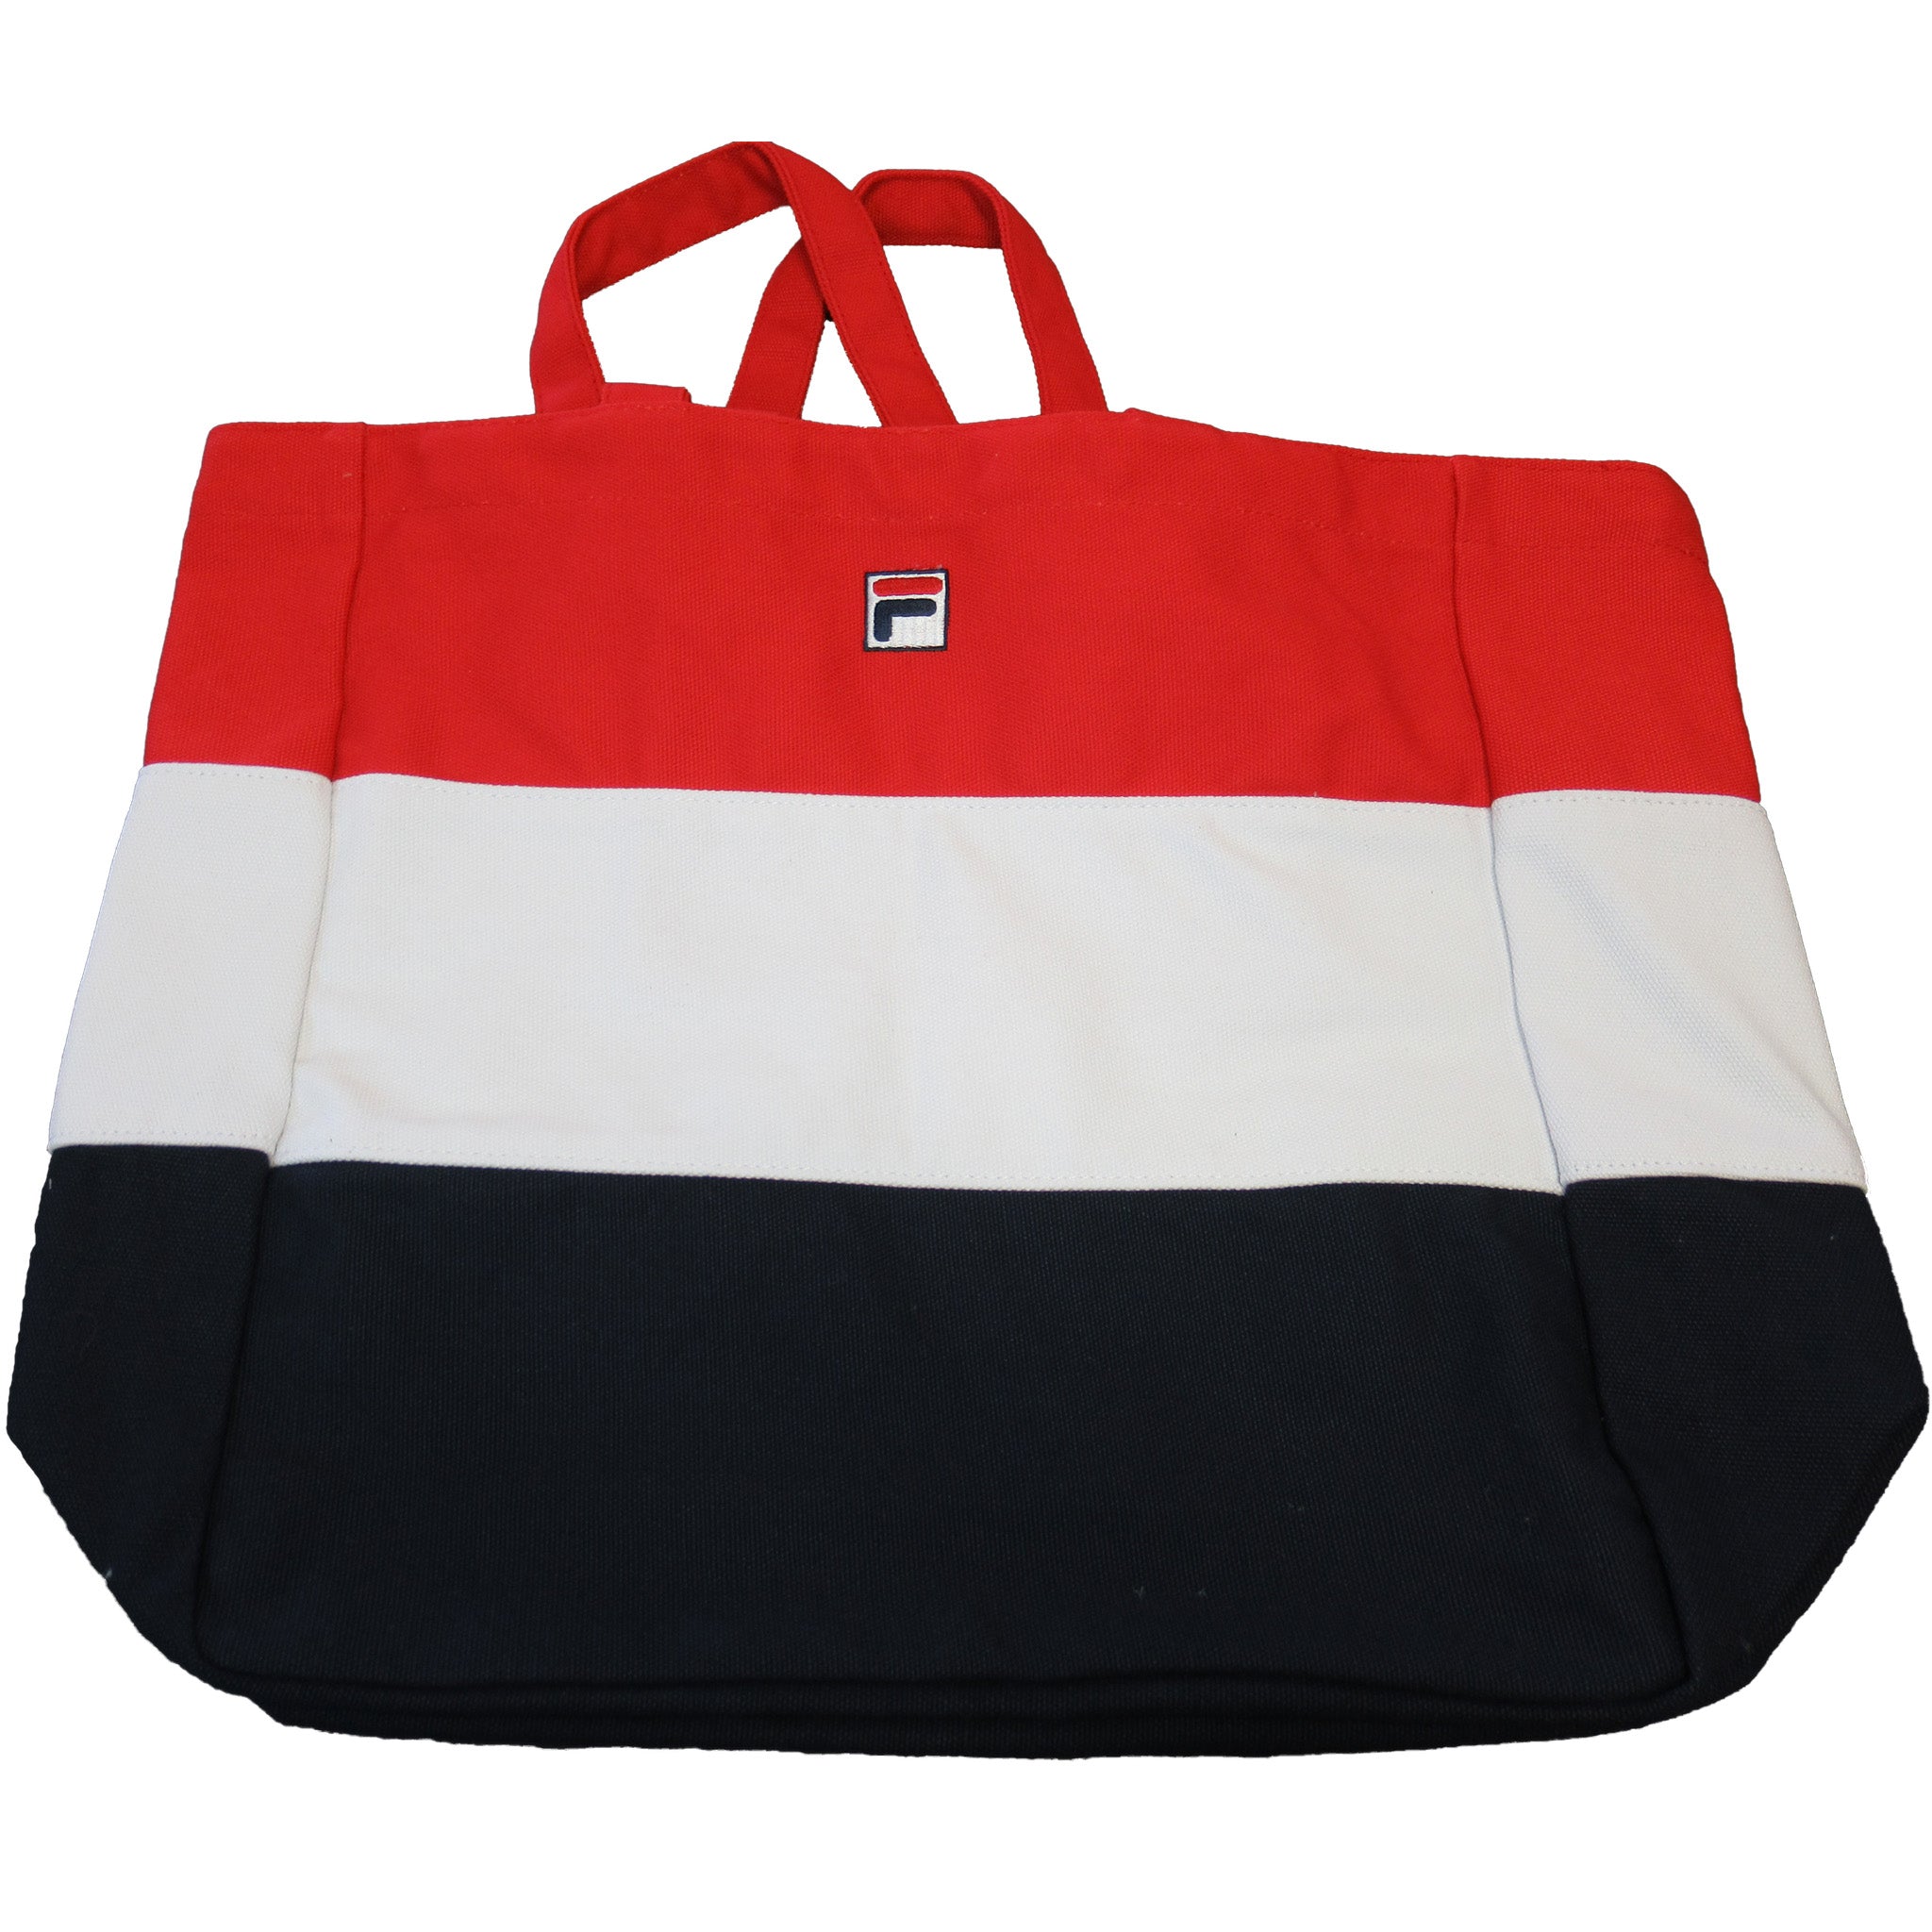 Gift with Purchase Promo: Fila Bag by Marathon Sports